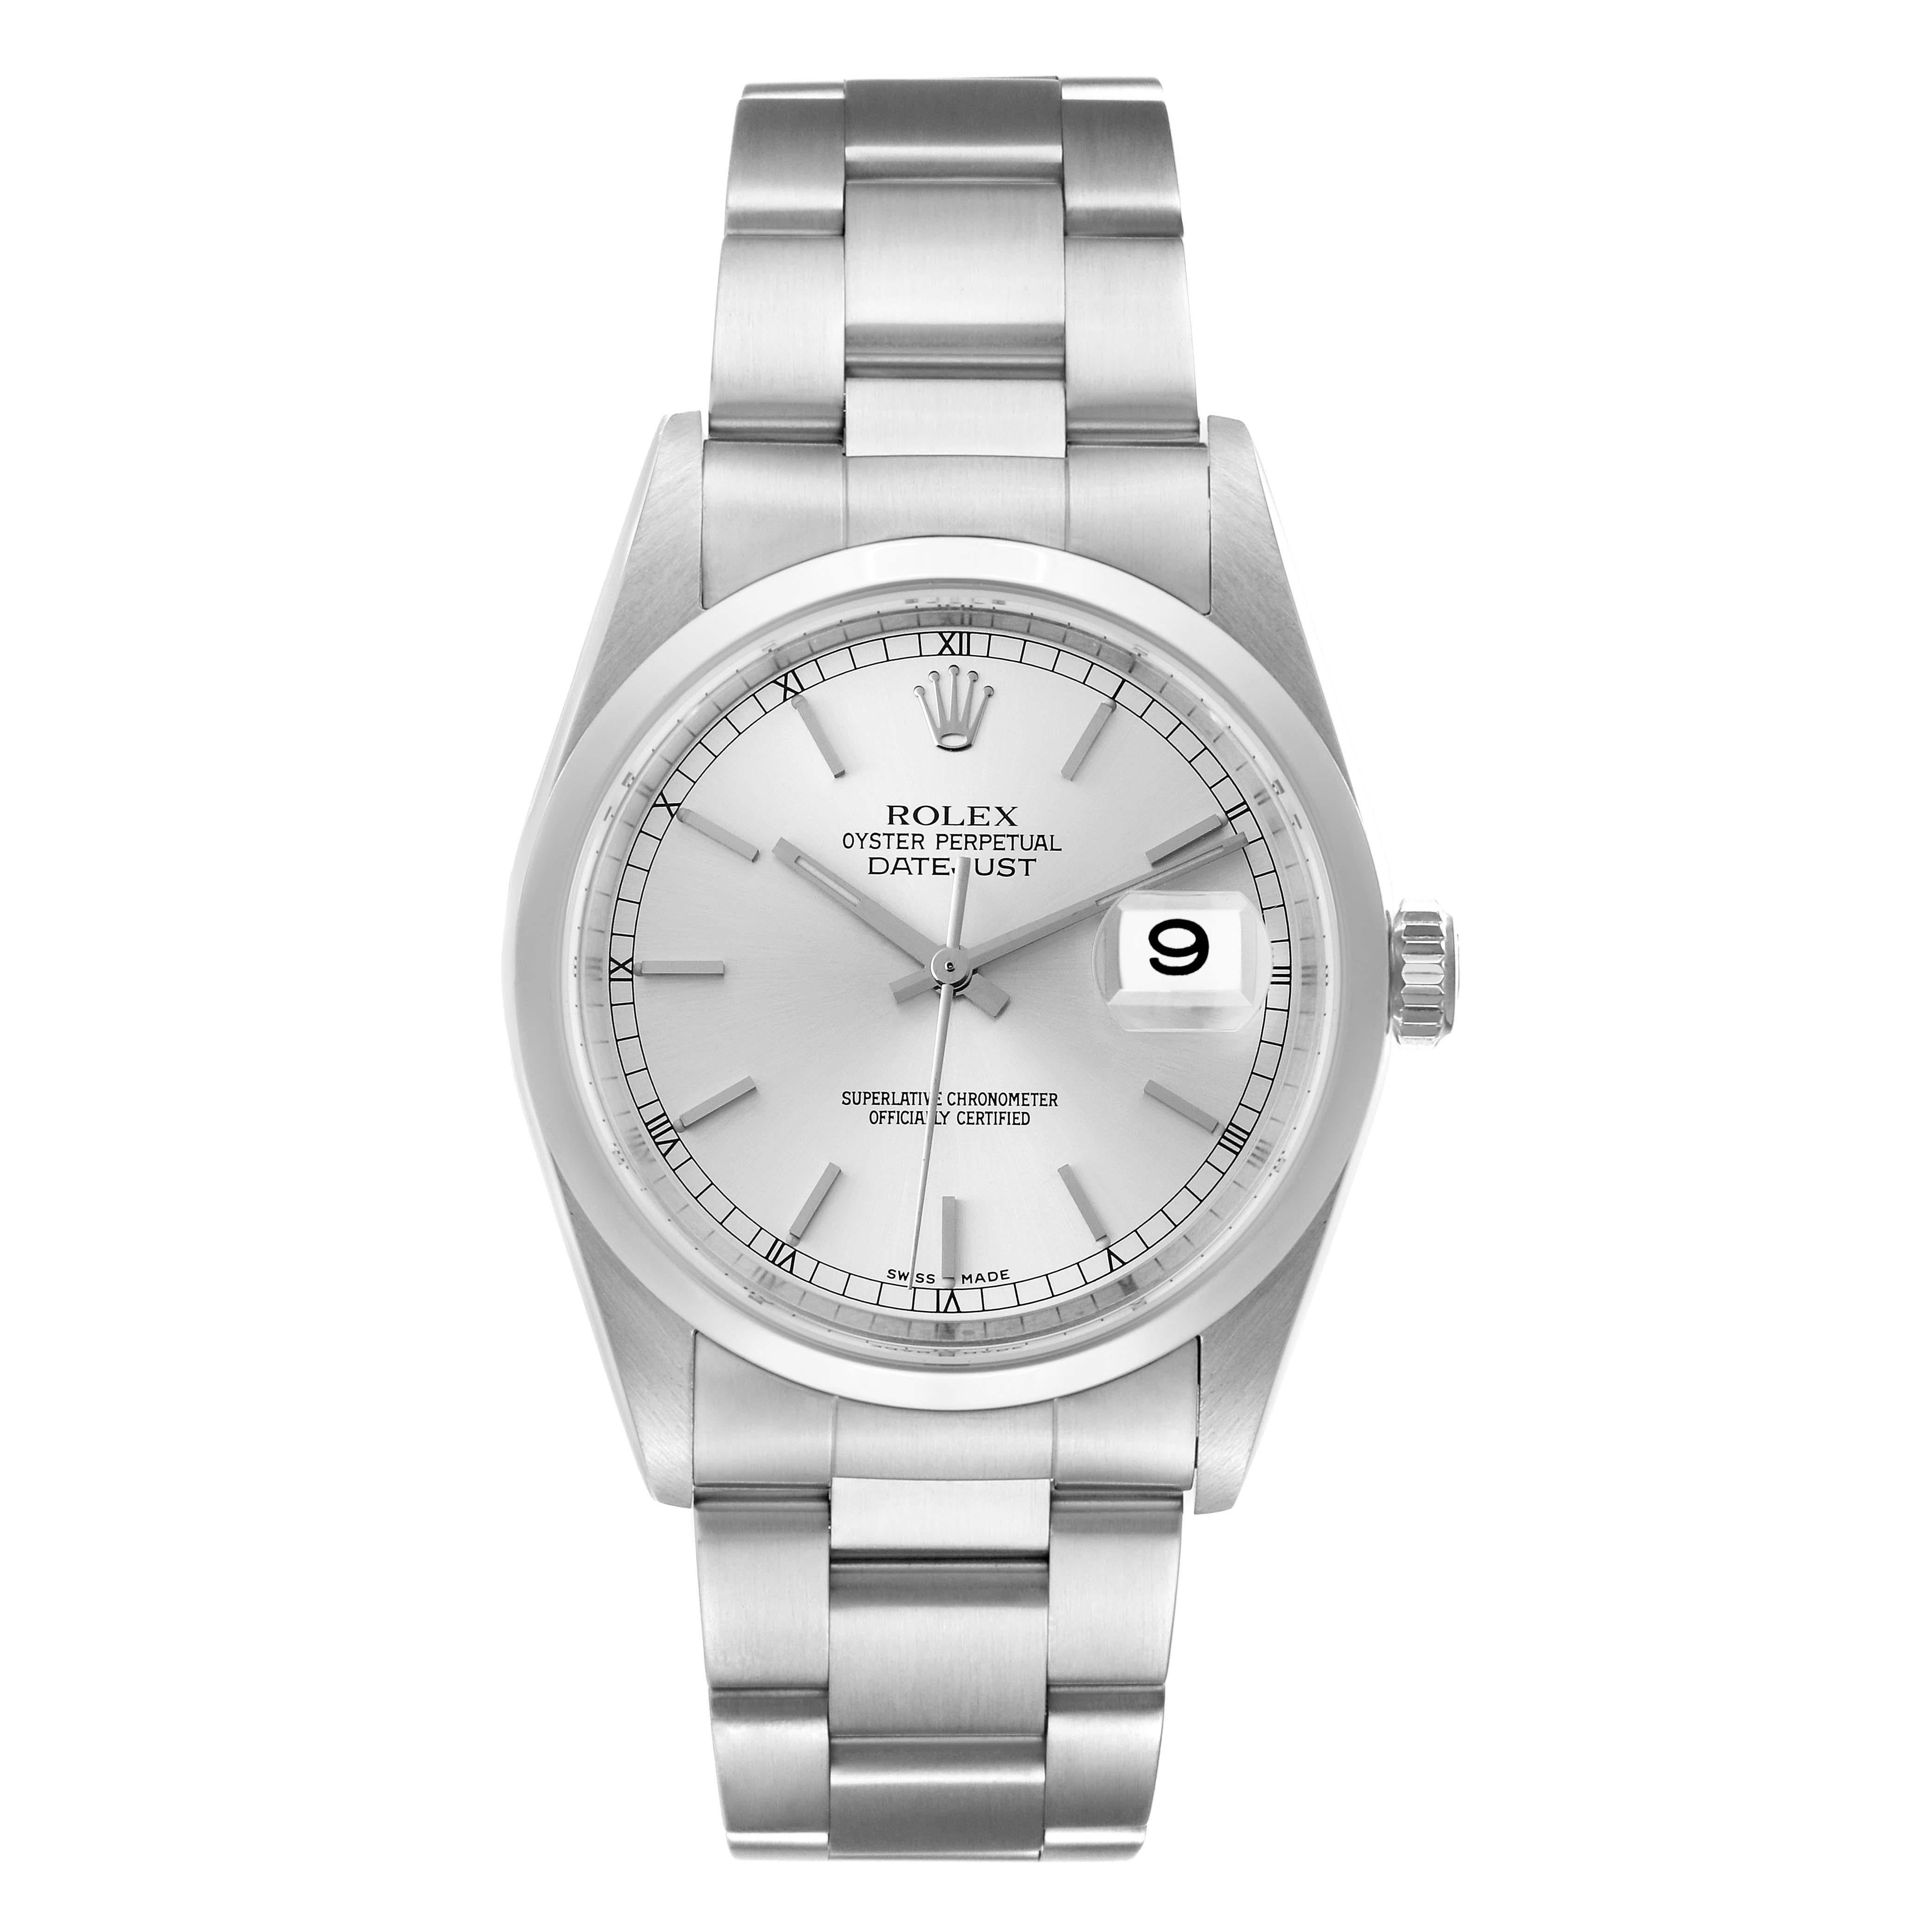 Rolex Datejust Silver Dial Smooth Bezel Steel Mens Watch 16200 Box Papers. Officially certified chronometer automatic self-winding movement with quickset date function. Stainless steel oyster case 36mm in diameter. Rolex logo on the crown. Stainless